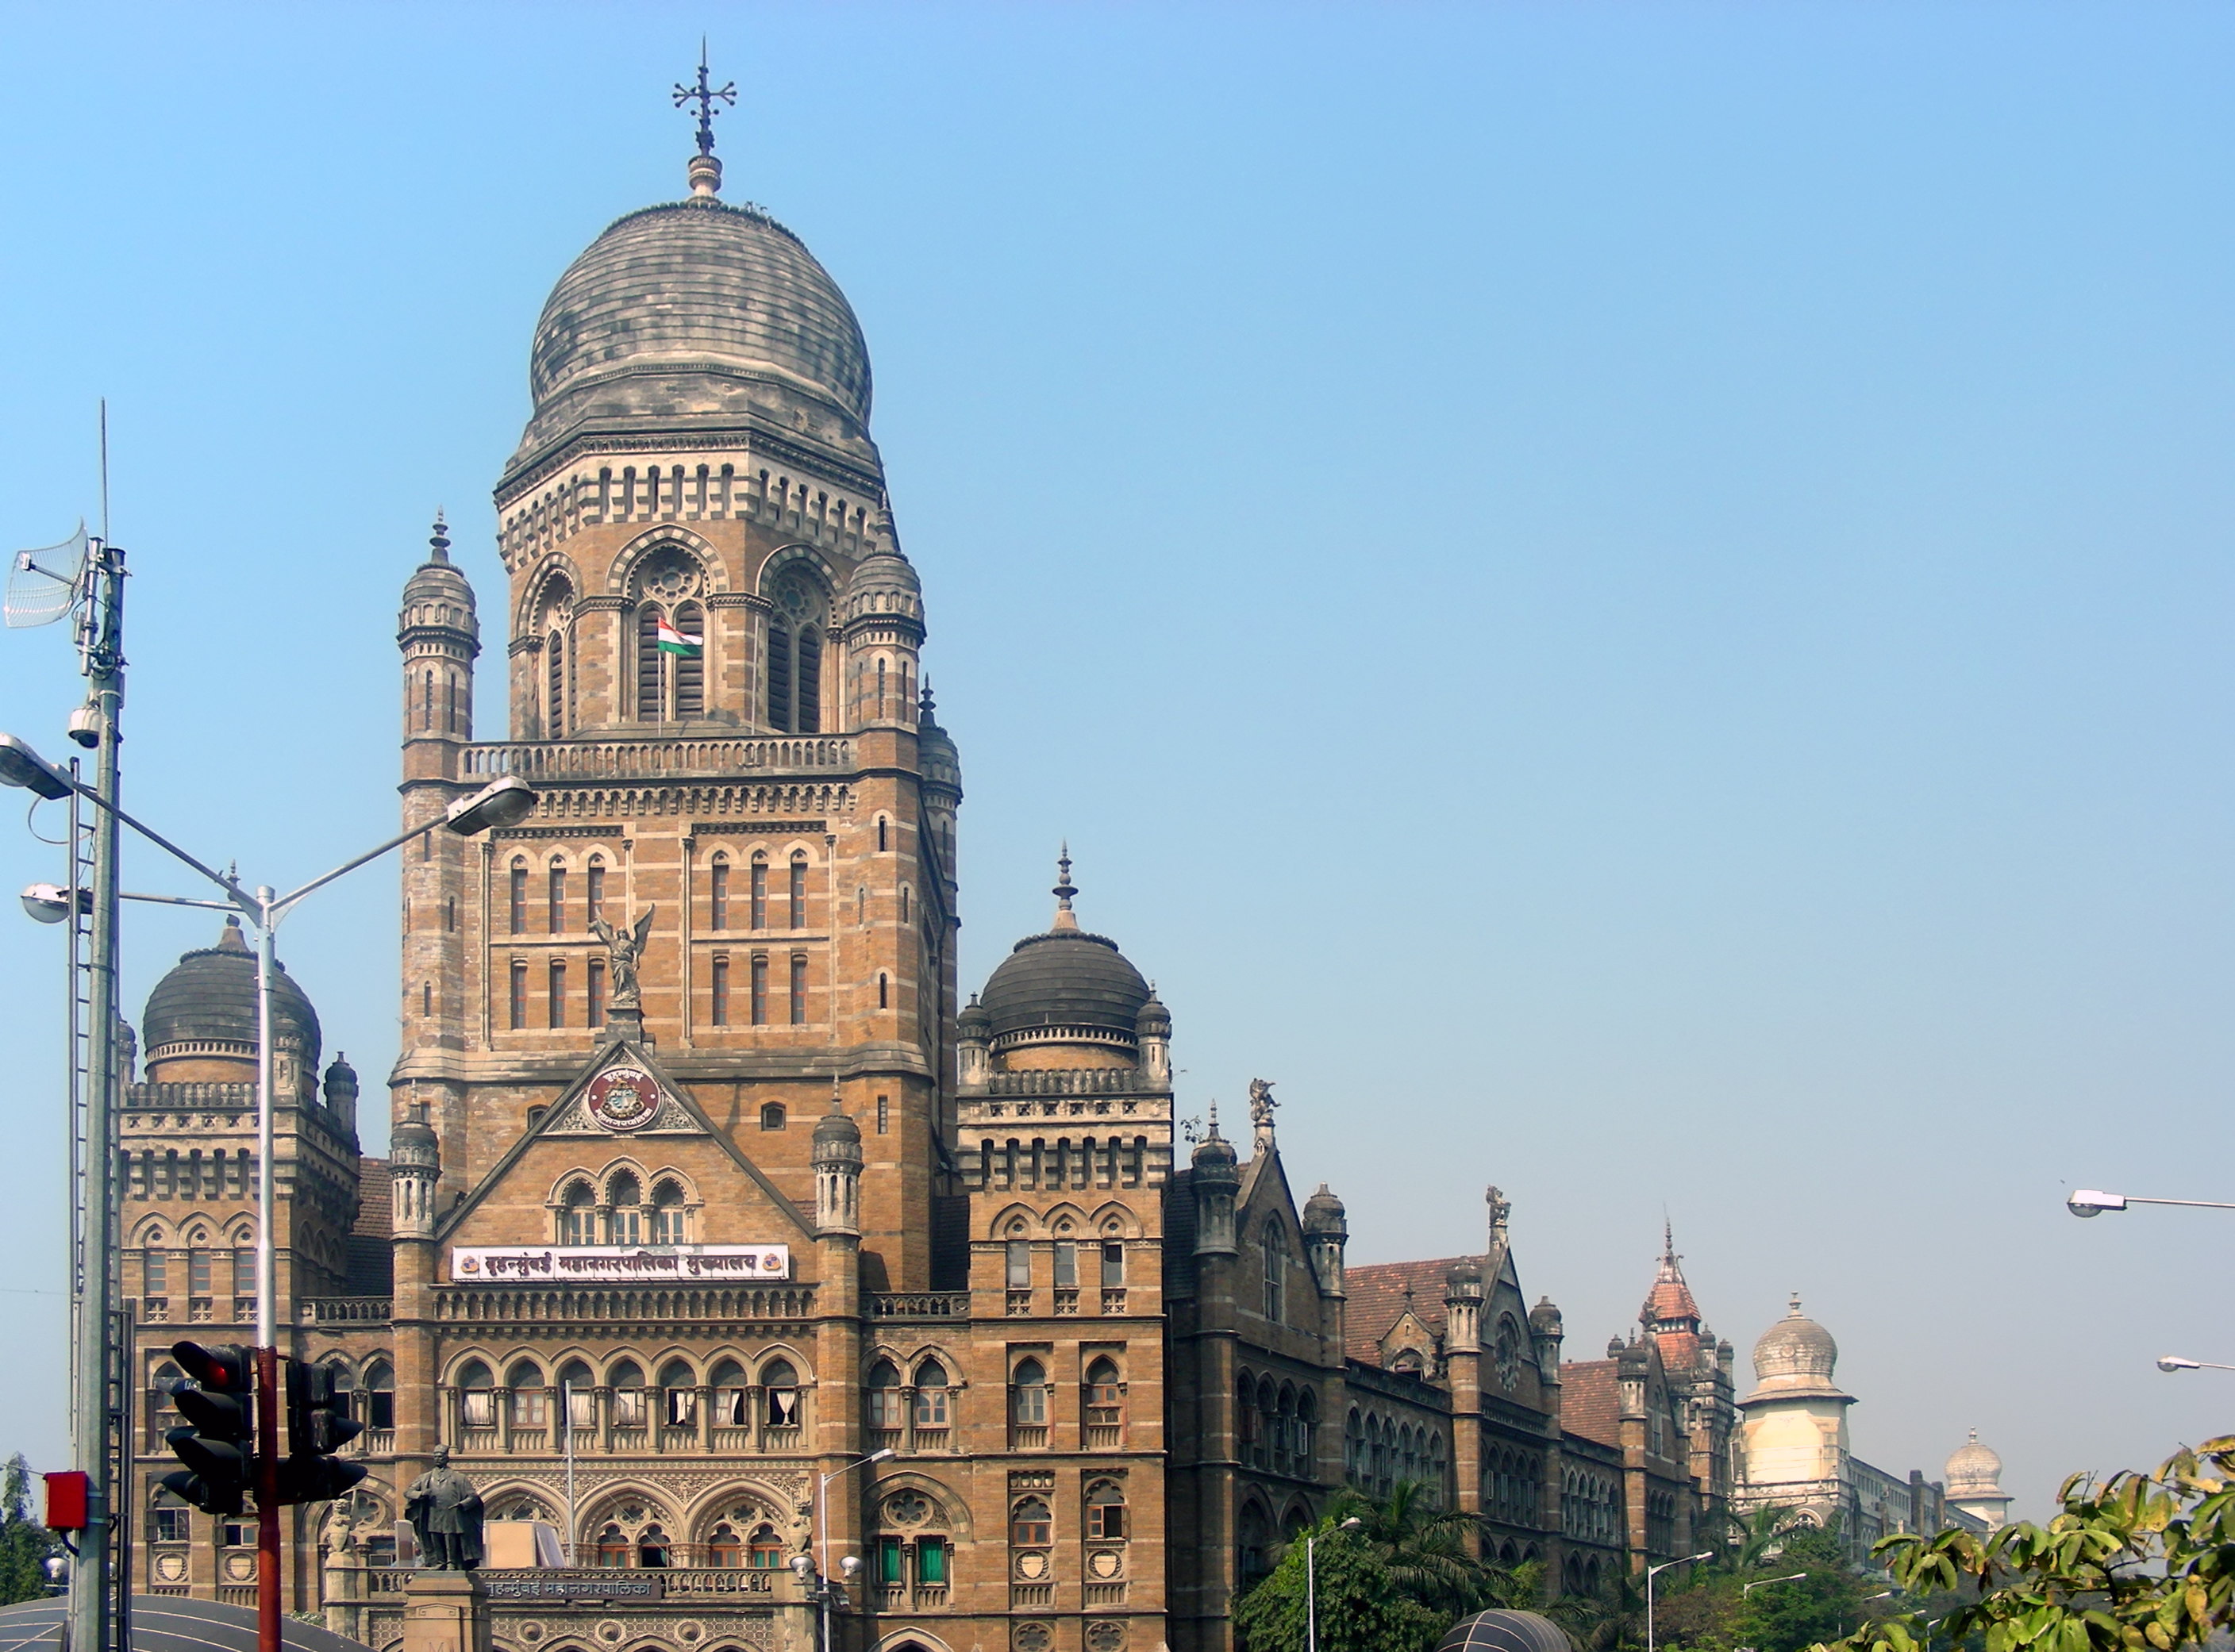 Mumbai’s Cluster Buildings Less Than 250m HT Redevelopment Rules May Amend